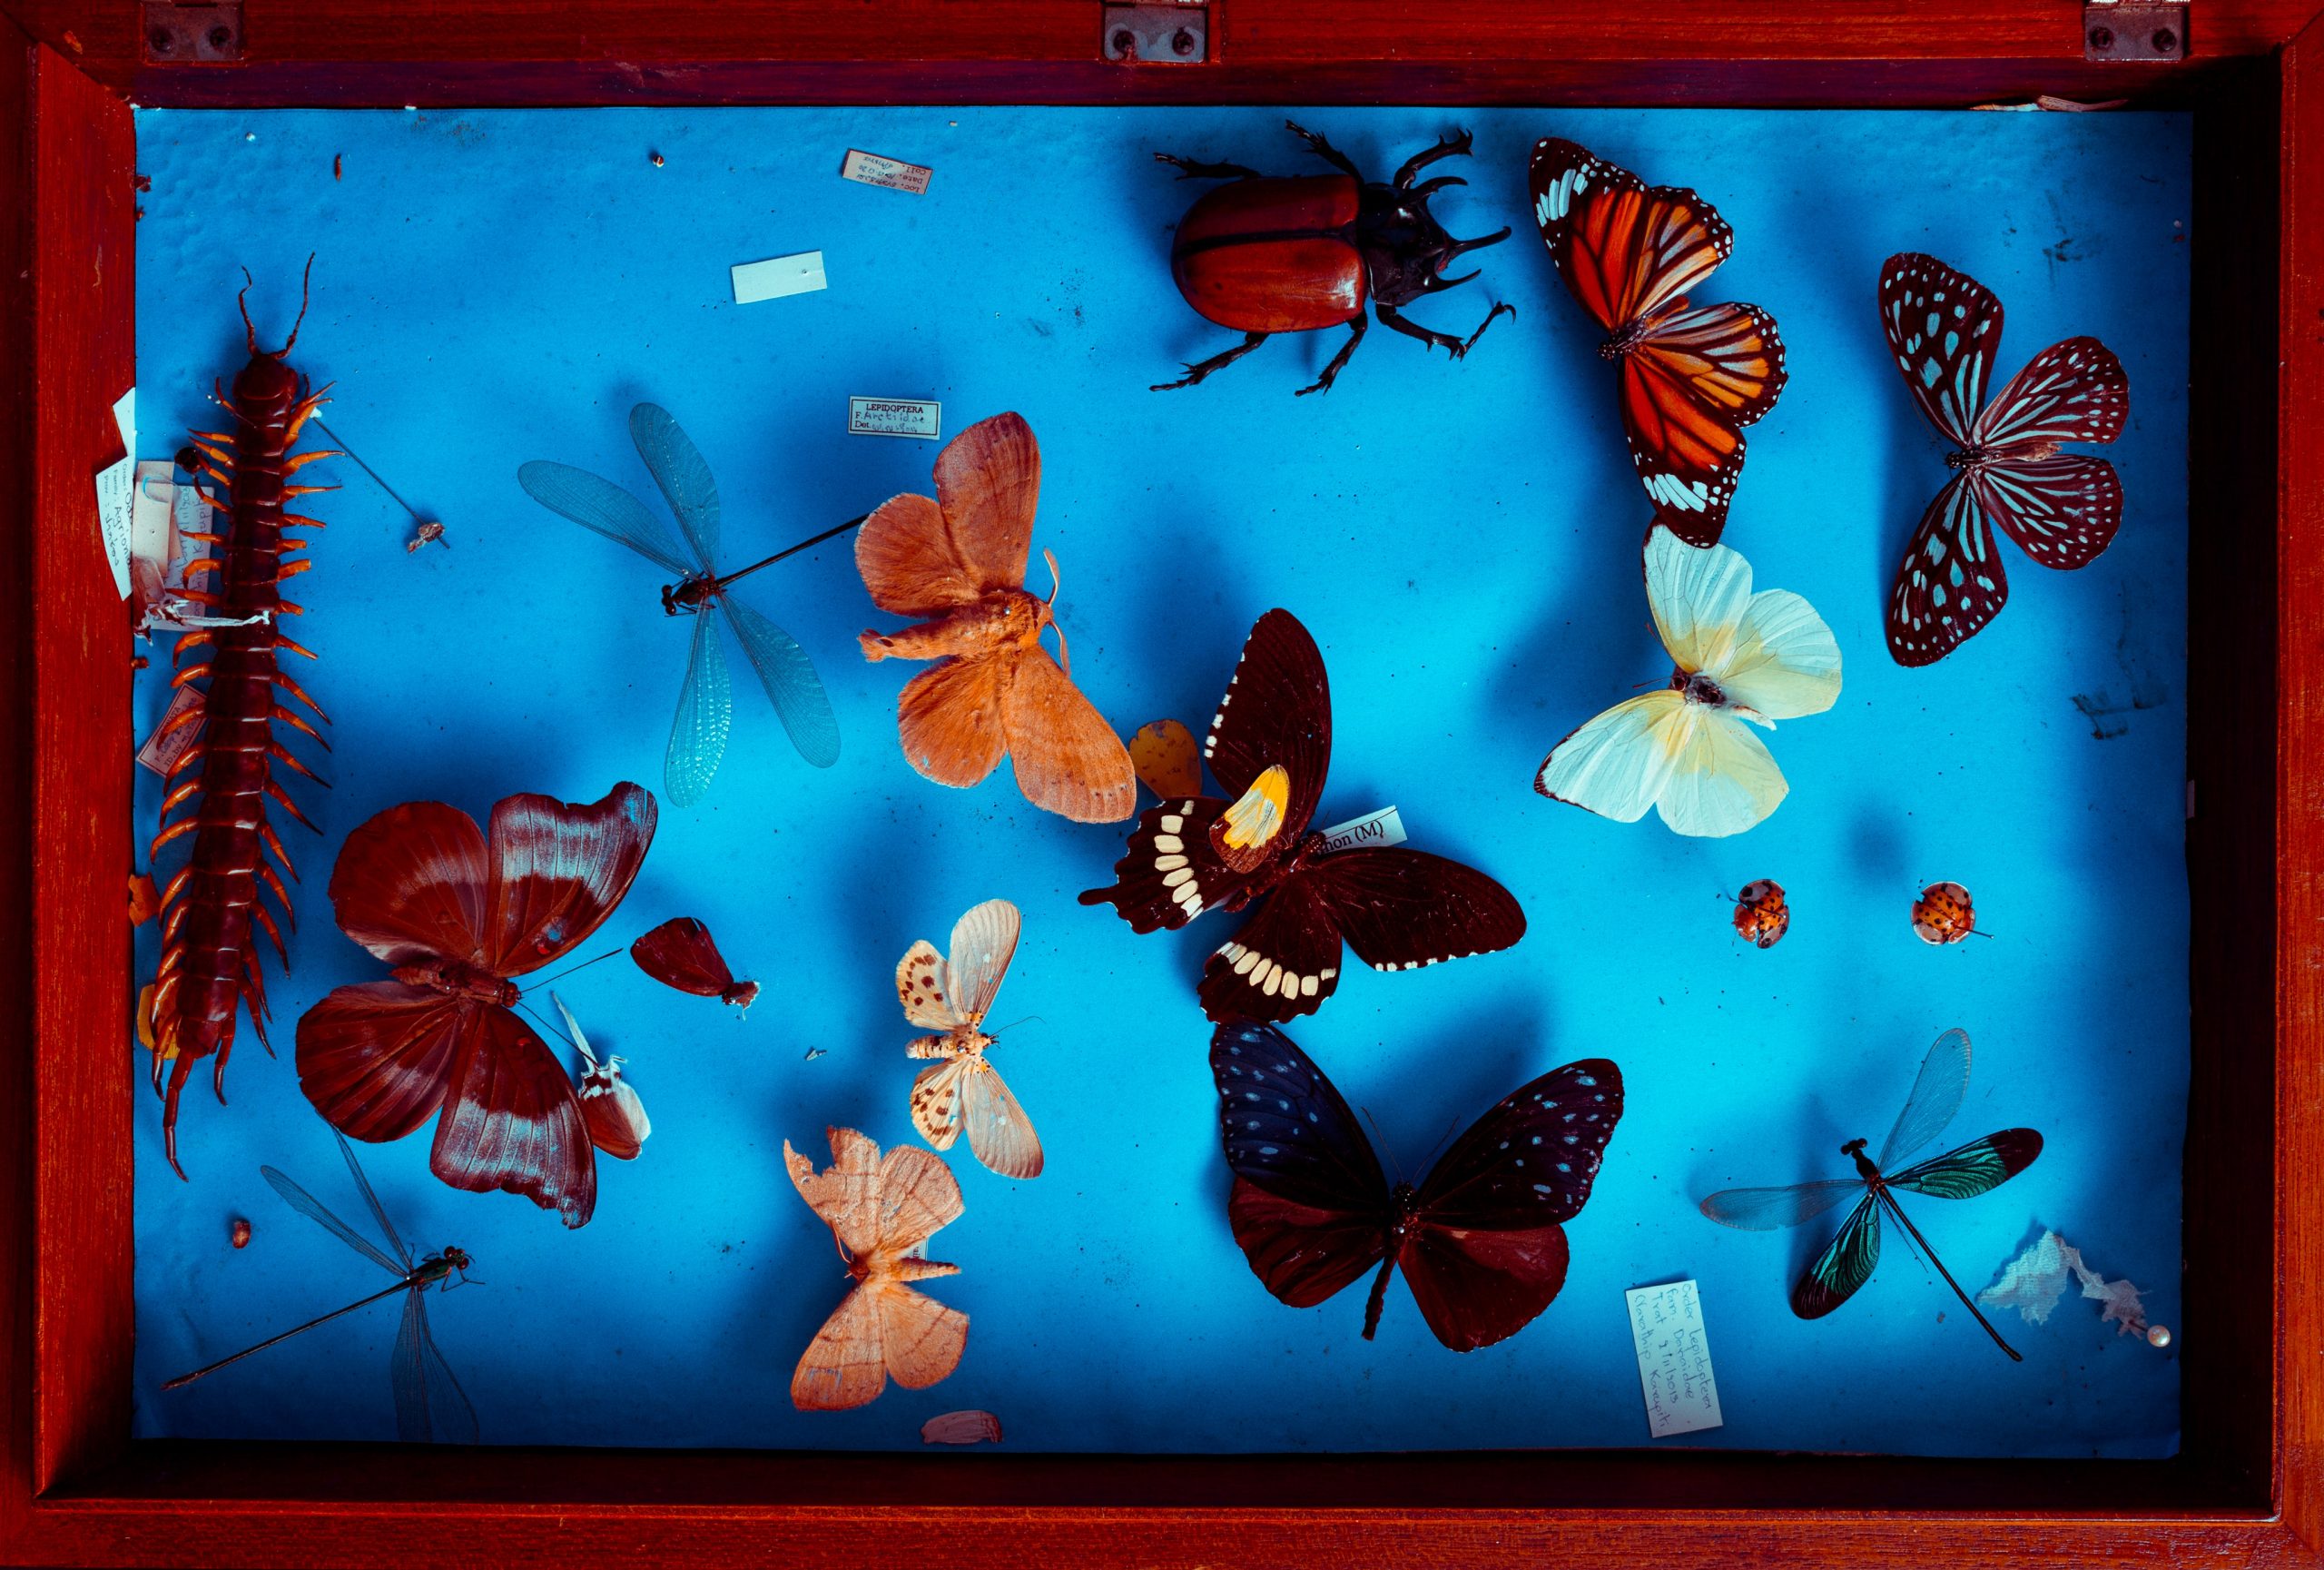 An arrangement of taxidermied insects in a blue display case.